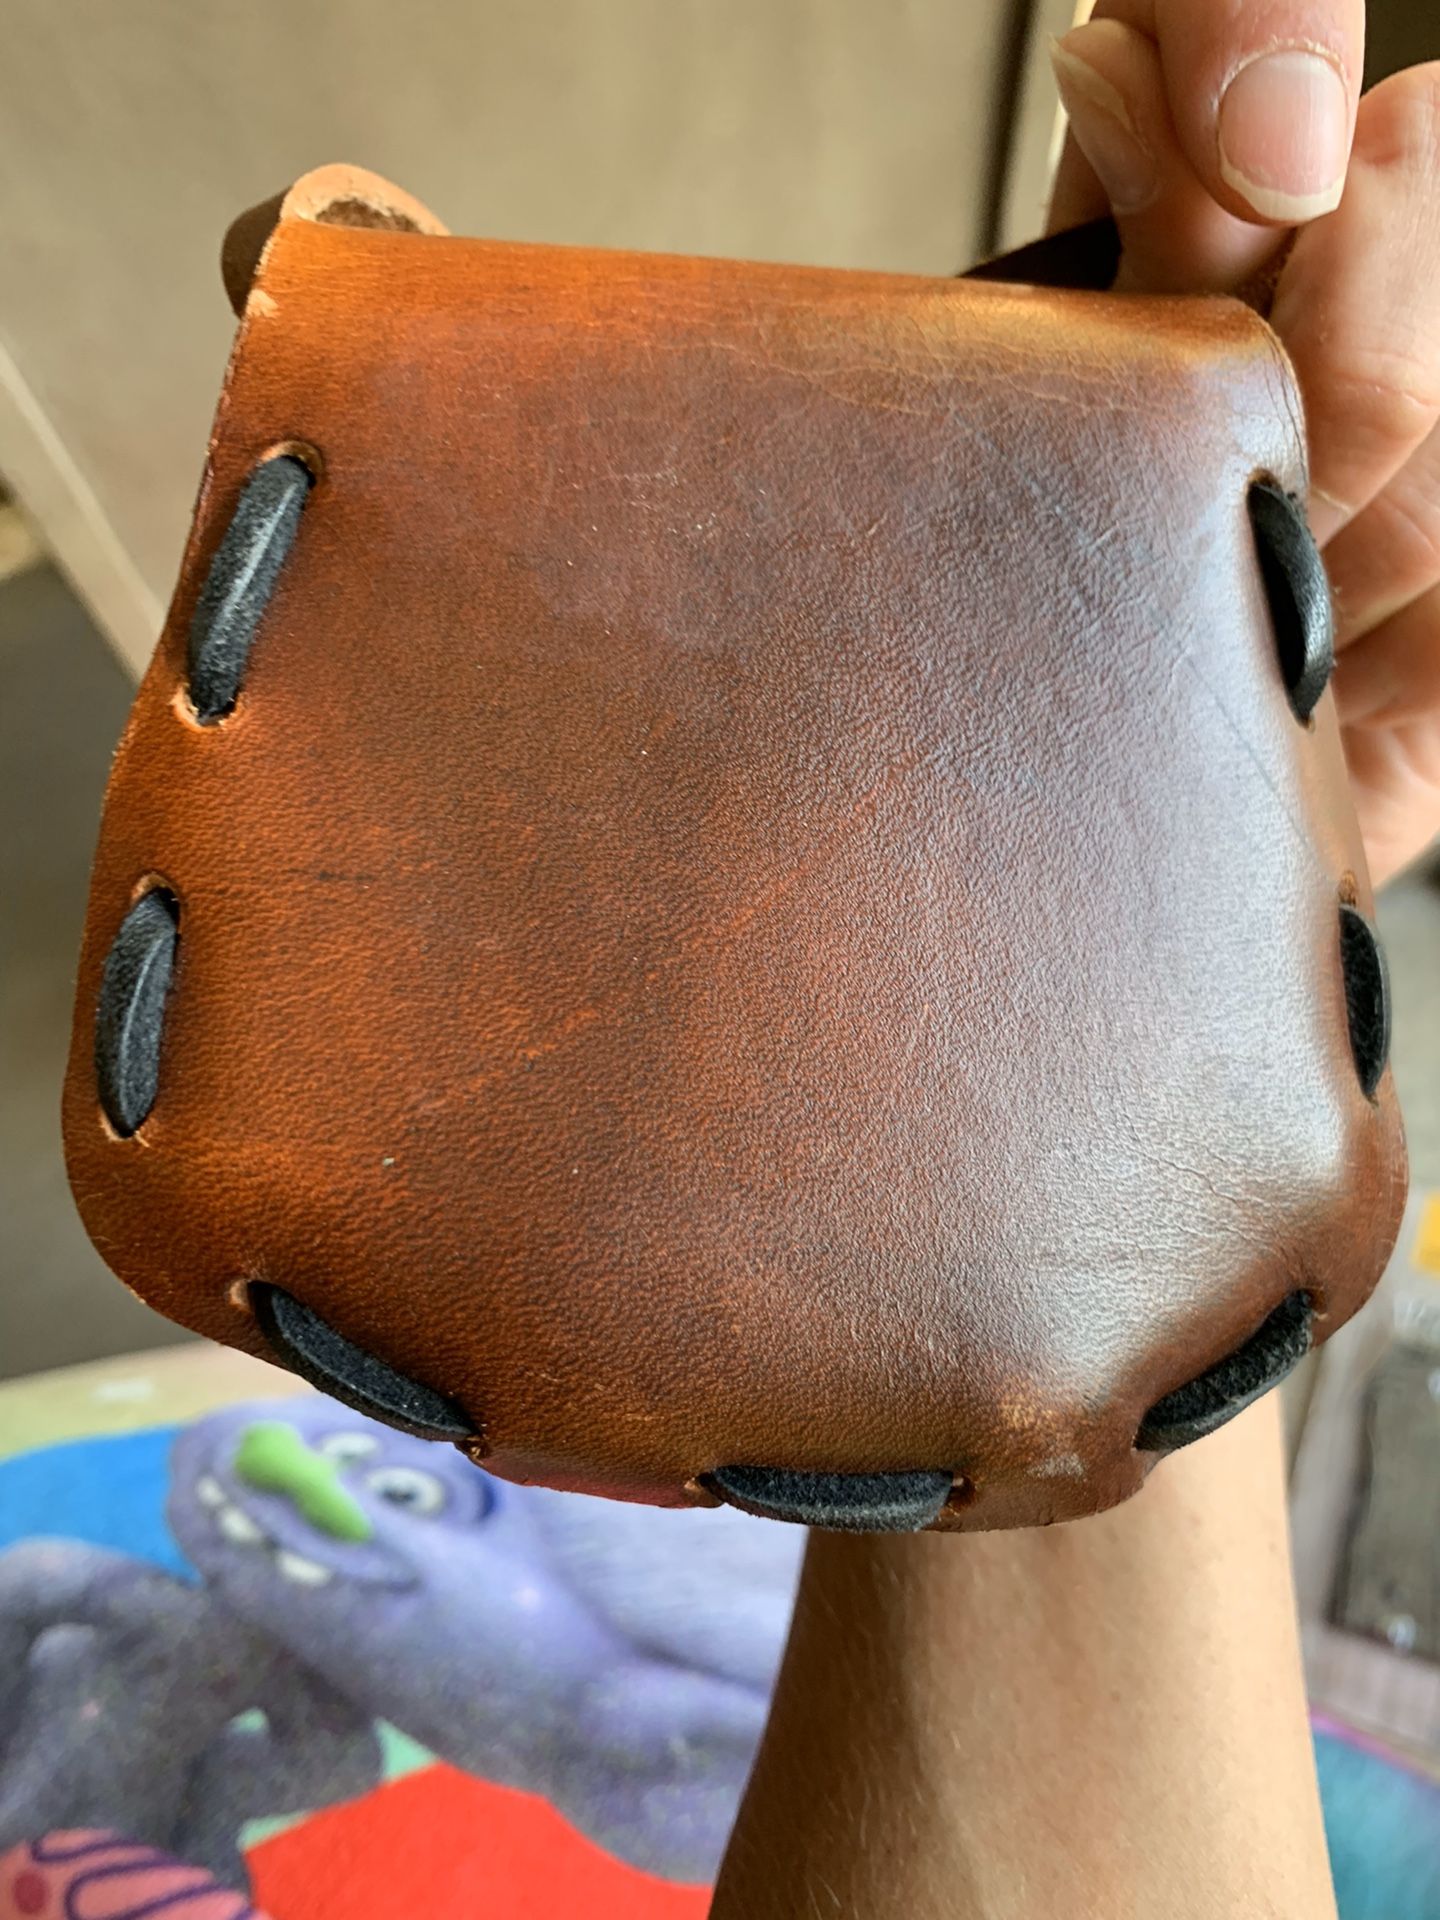 Brand New hand made leather bag.